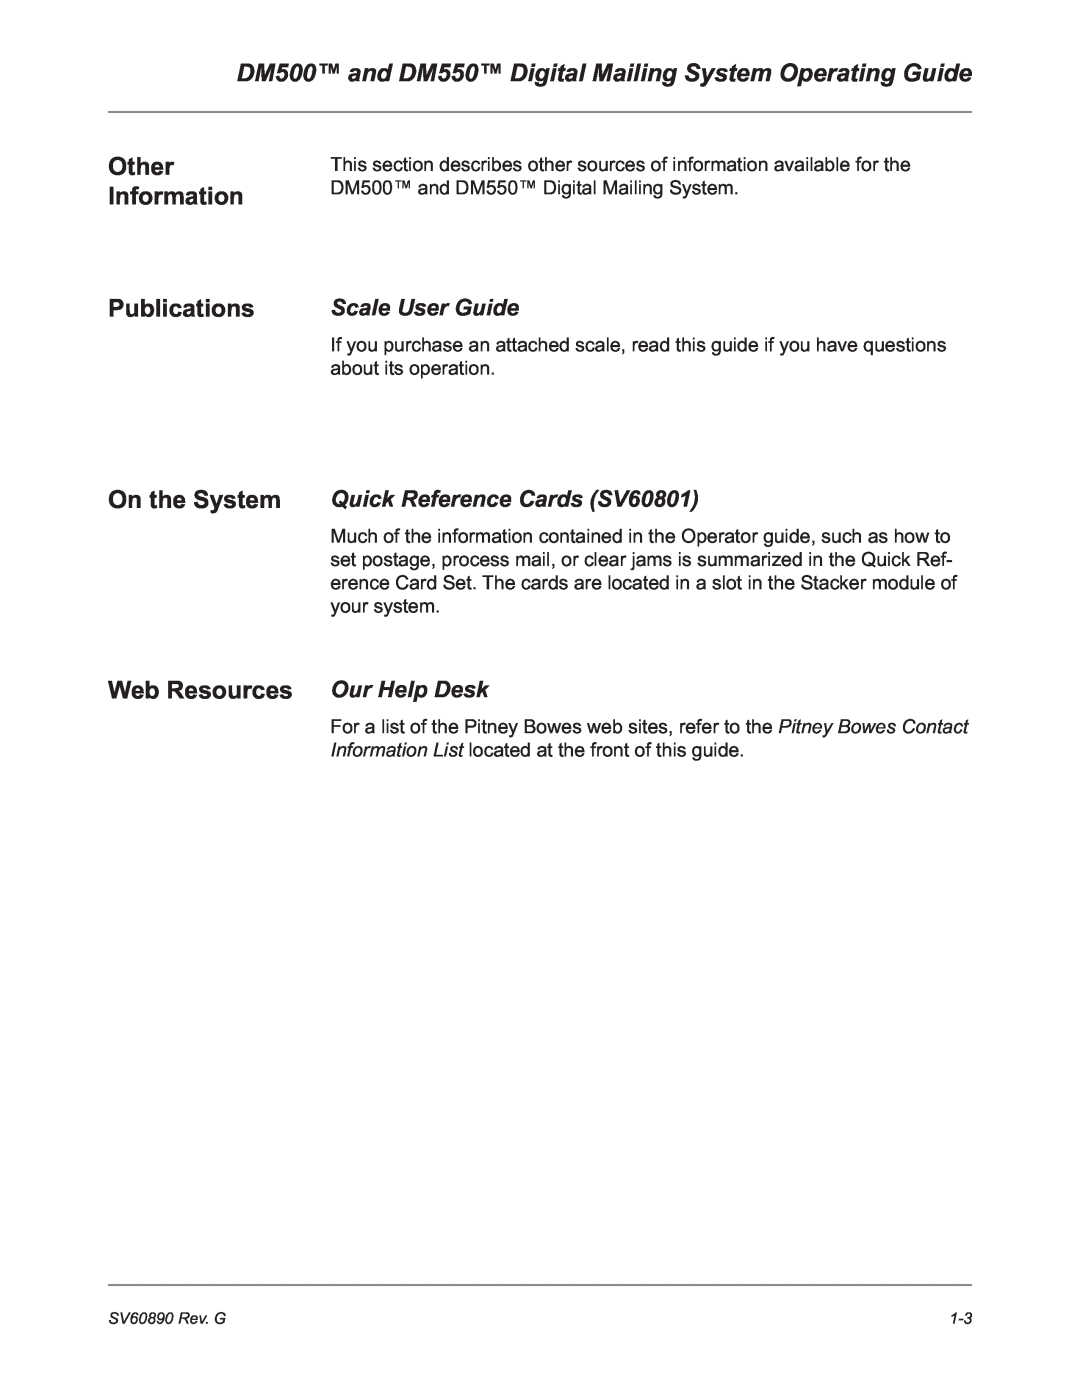 Pitney Bowes manual DM500 and DM550 Digital Mailing System Operating Guide, Other Information Publications On the System 